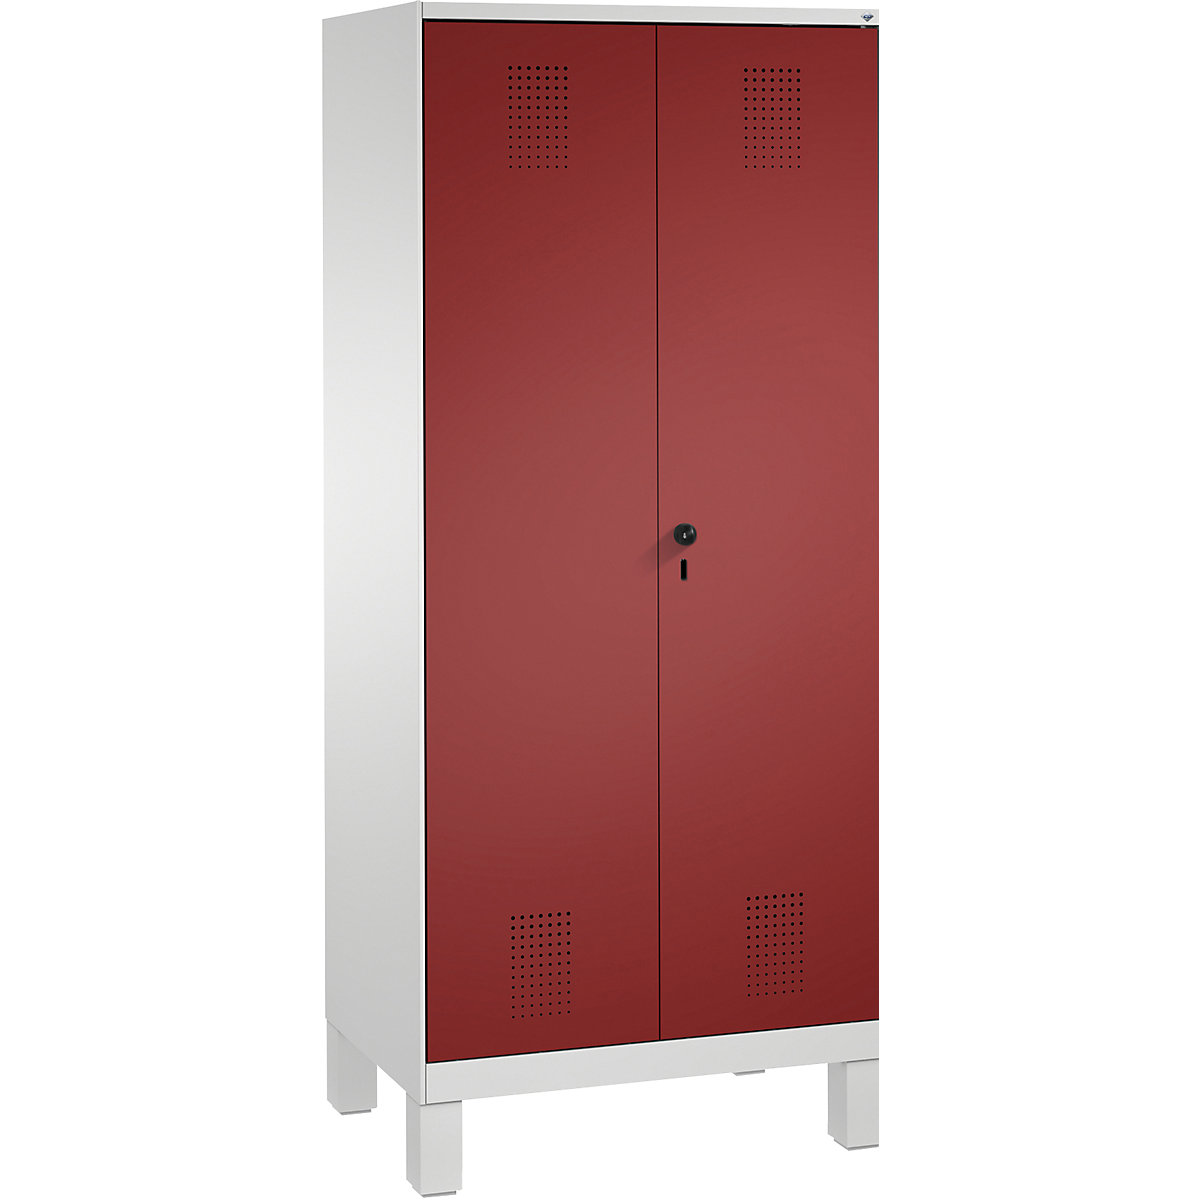 EVOLO storage cupboard, doors close in the middle, with feet – C+P, 2 compartments, 8 shelves, compartment width 400 mm, light grey / ruby red-15